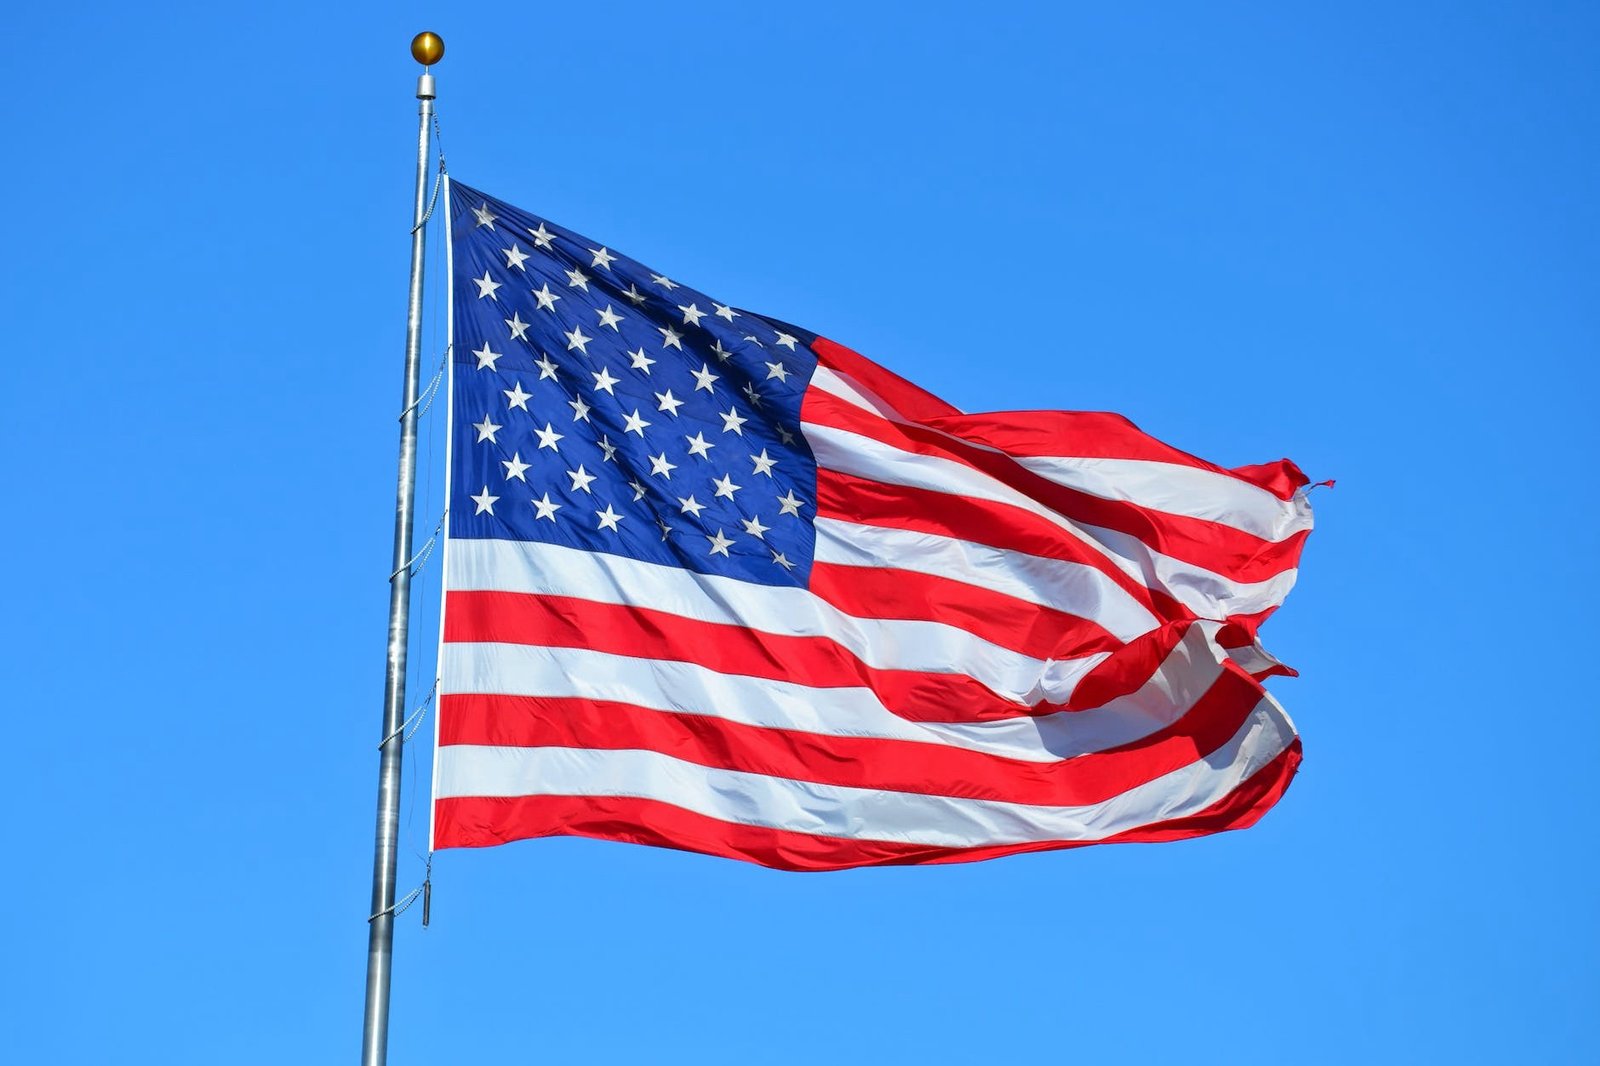 United States Federal Law Regarding the Display of the United States Flag